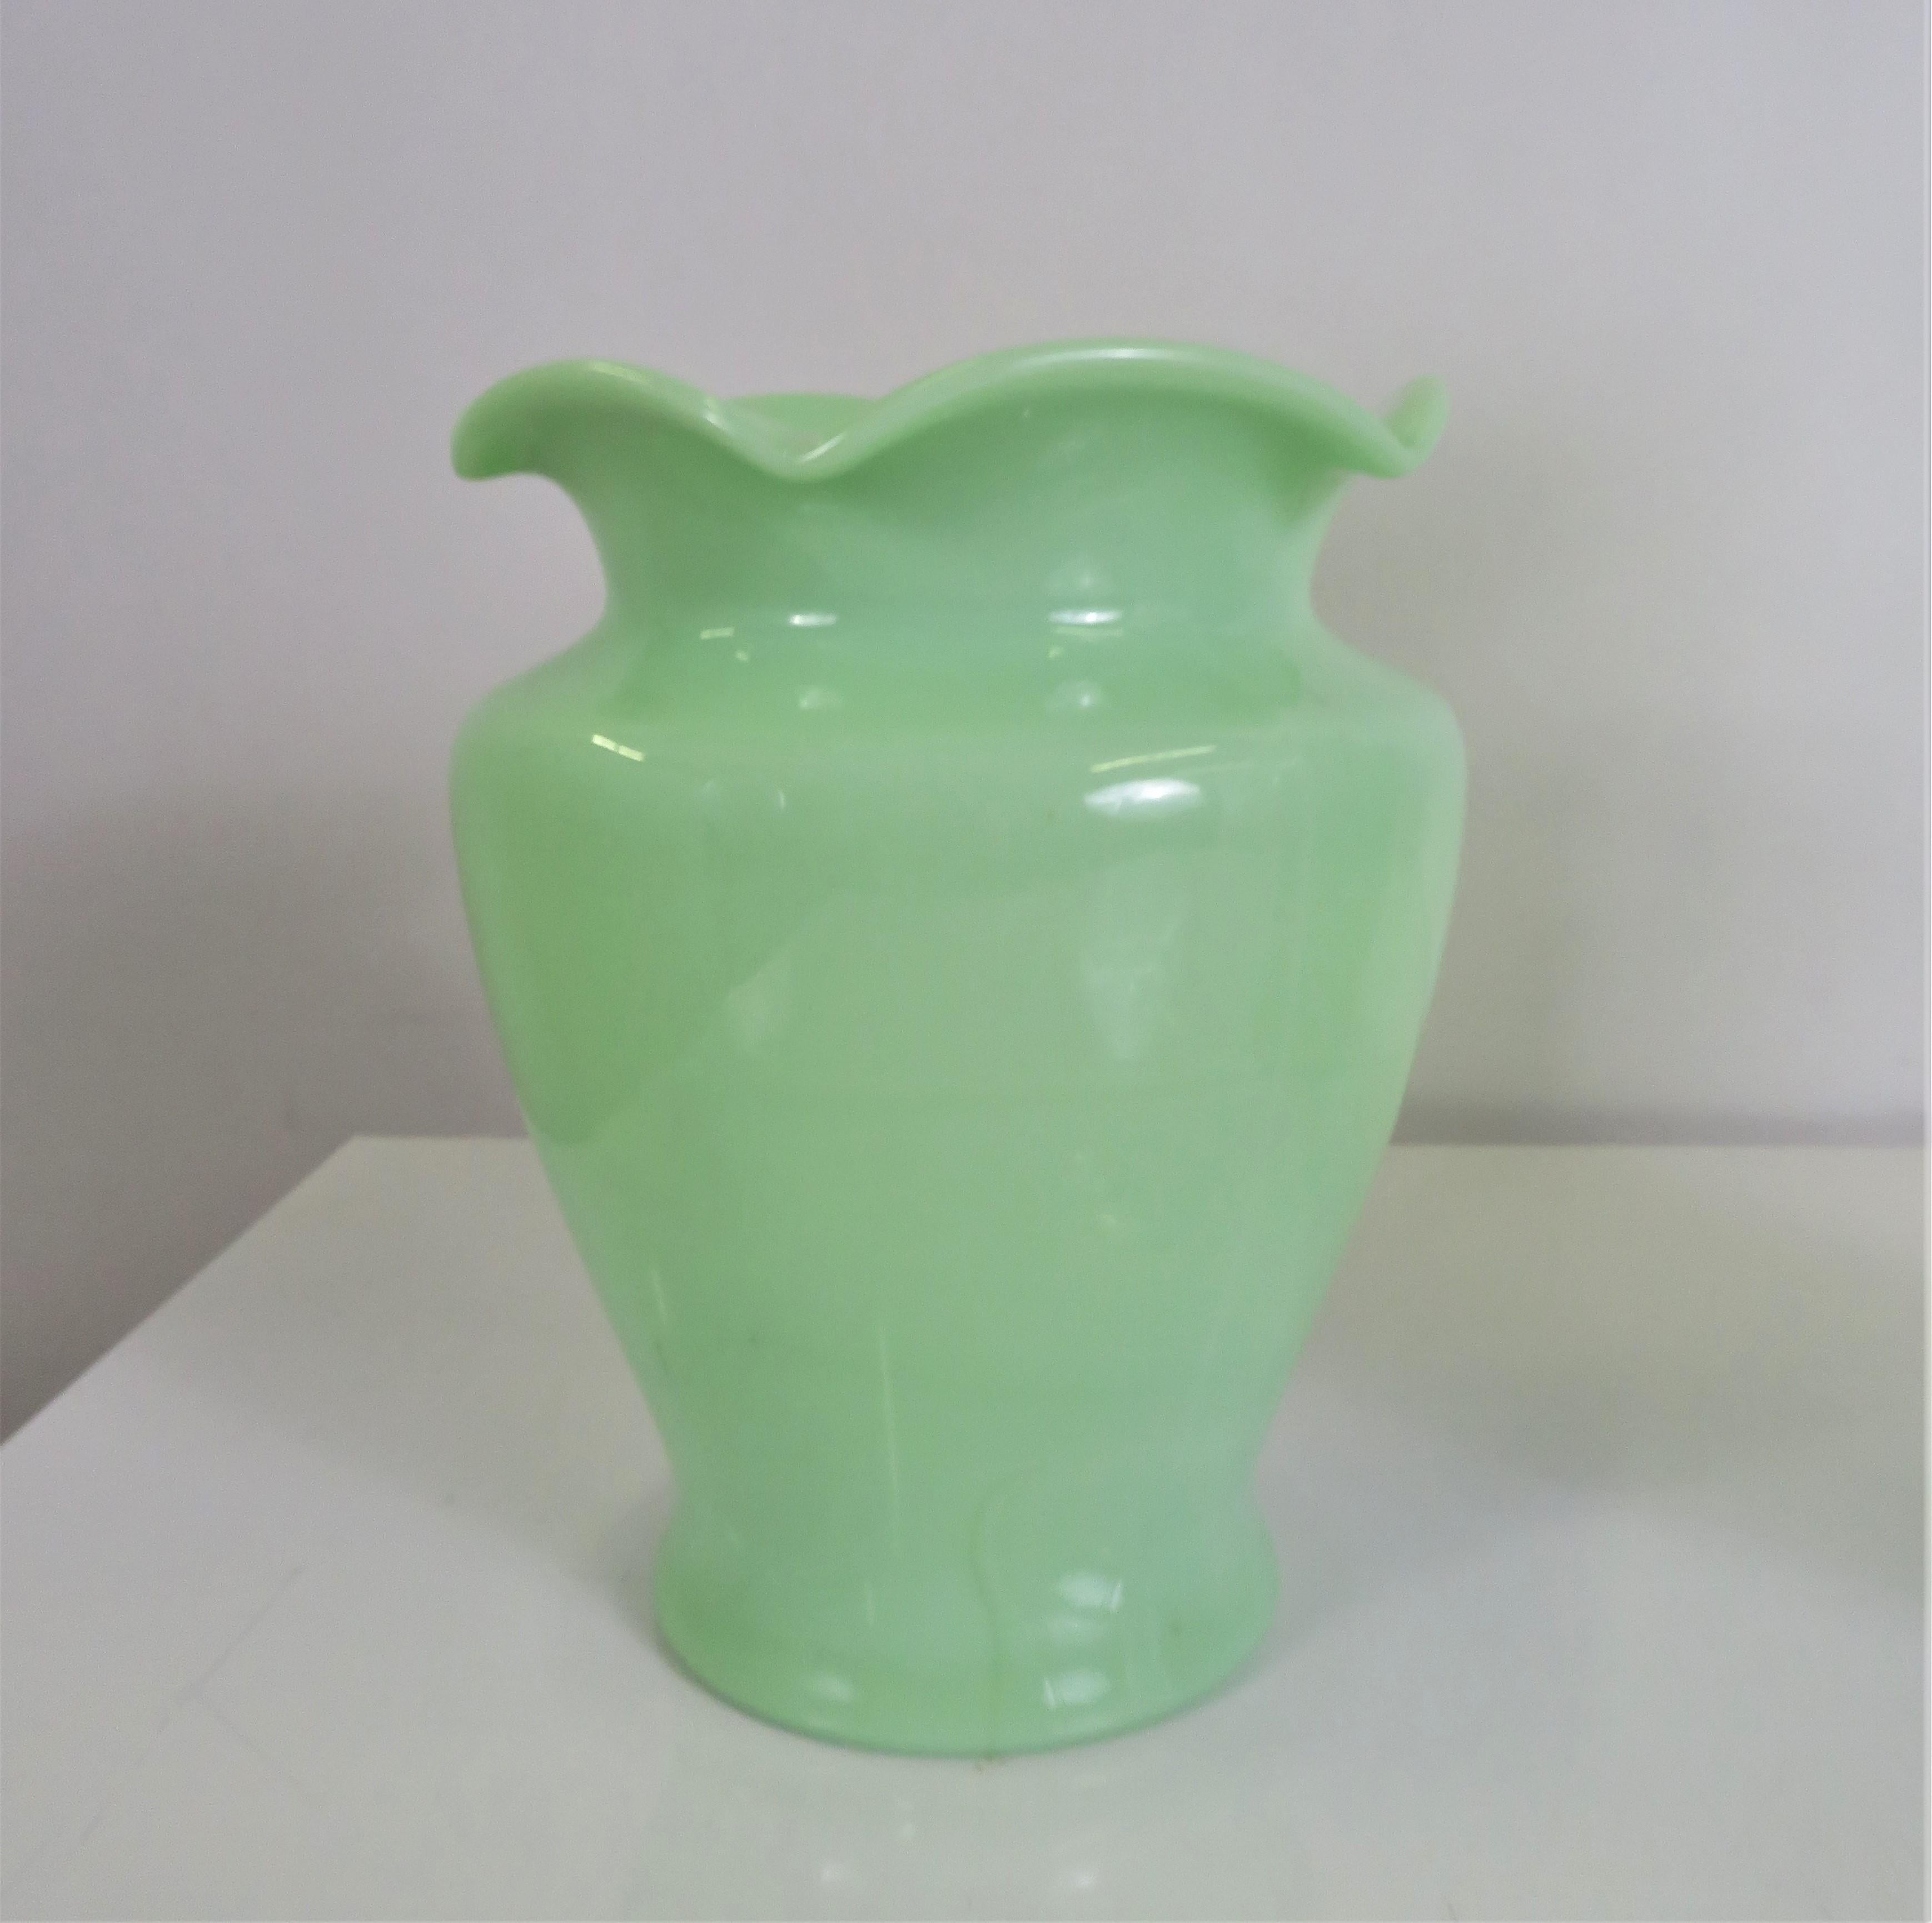 American Grouping of 3 Jadite Green Mid-Century Modern Sarah Vases by McKee Glass 1940s